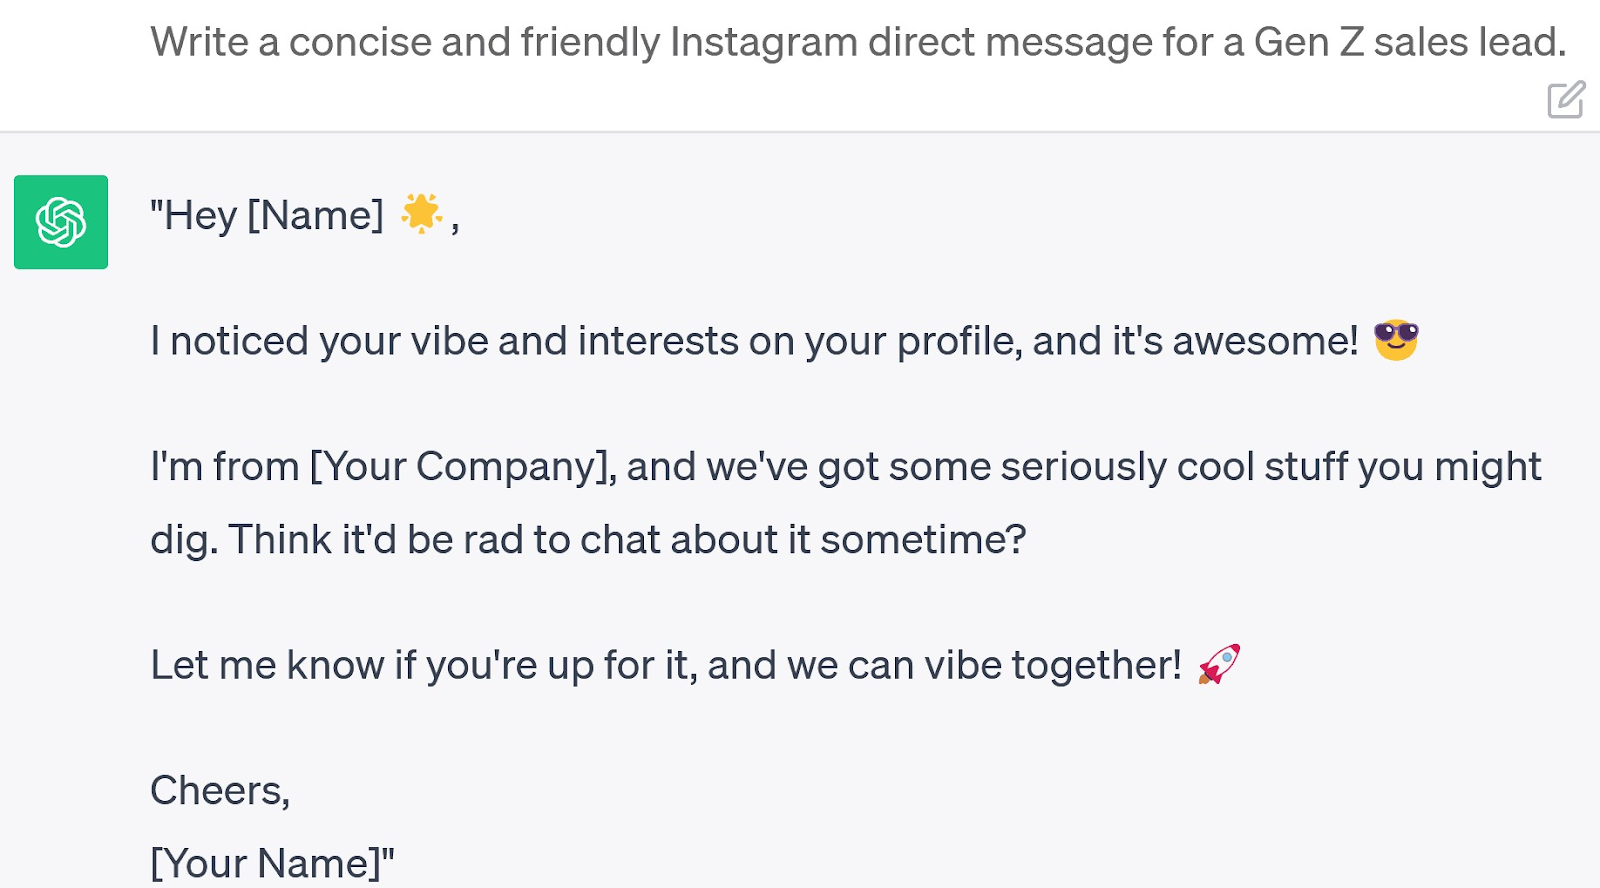 ChatGPT's response to “Write a concise and friendly Instagram direct message for a Gen Z sales lead” query